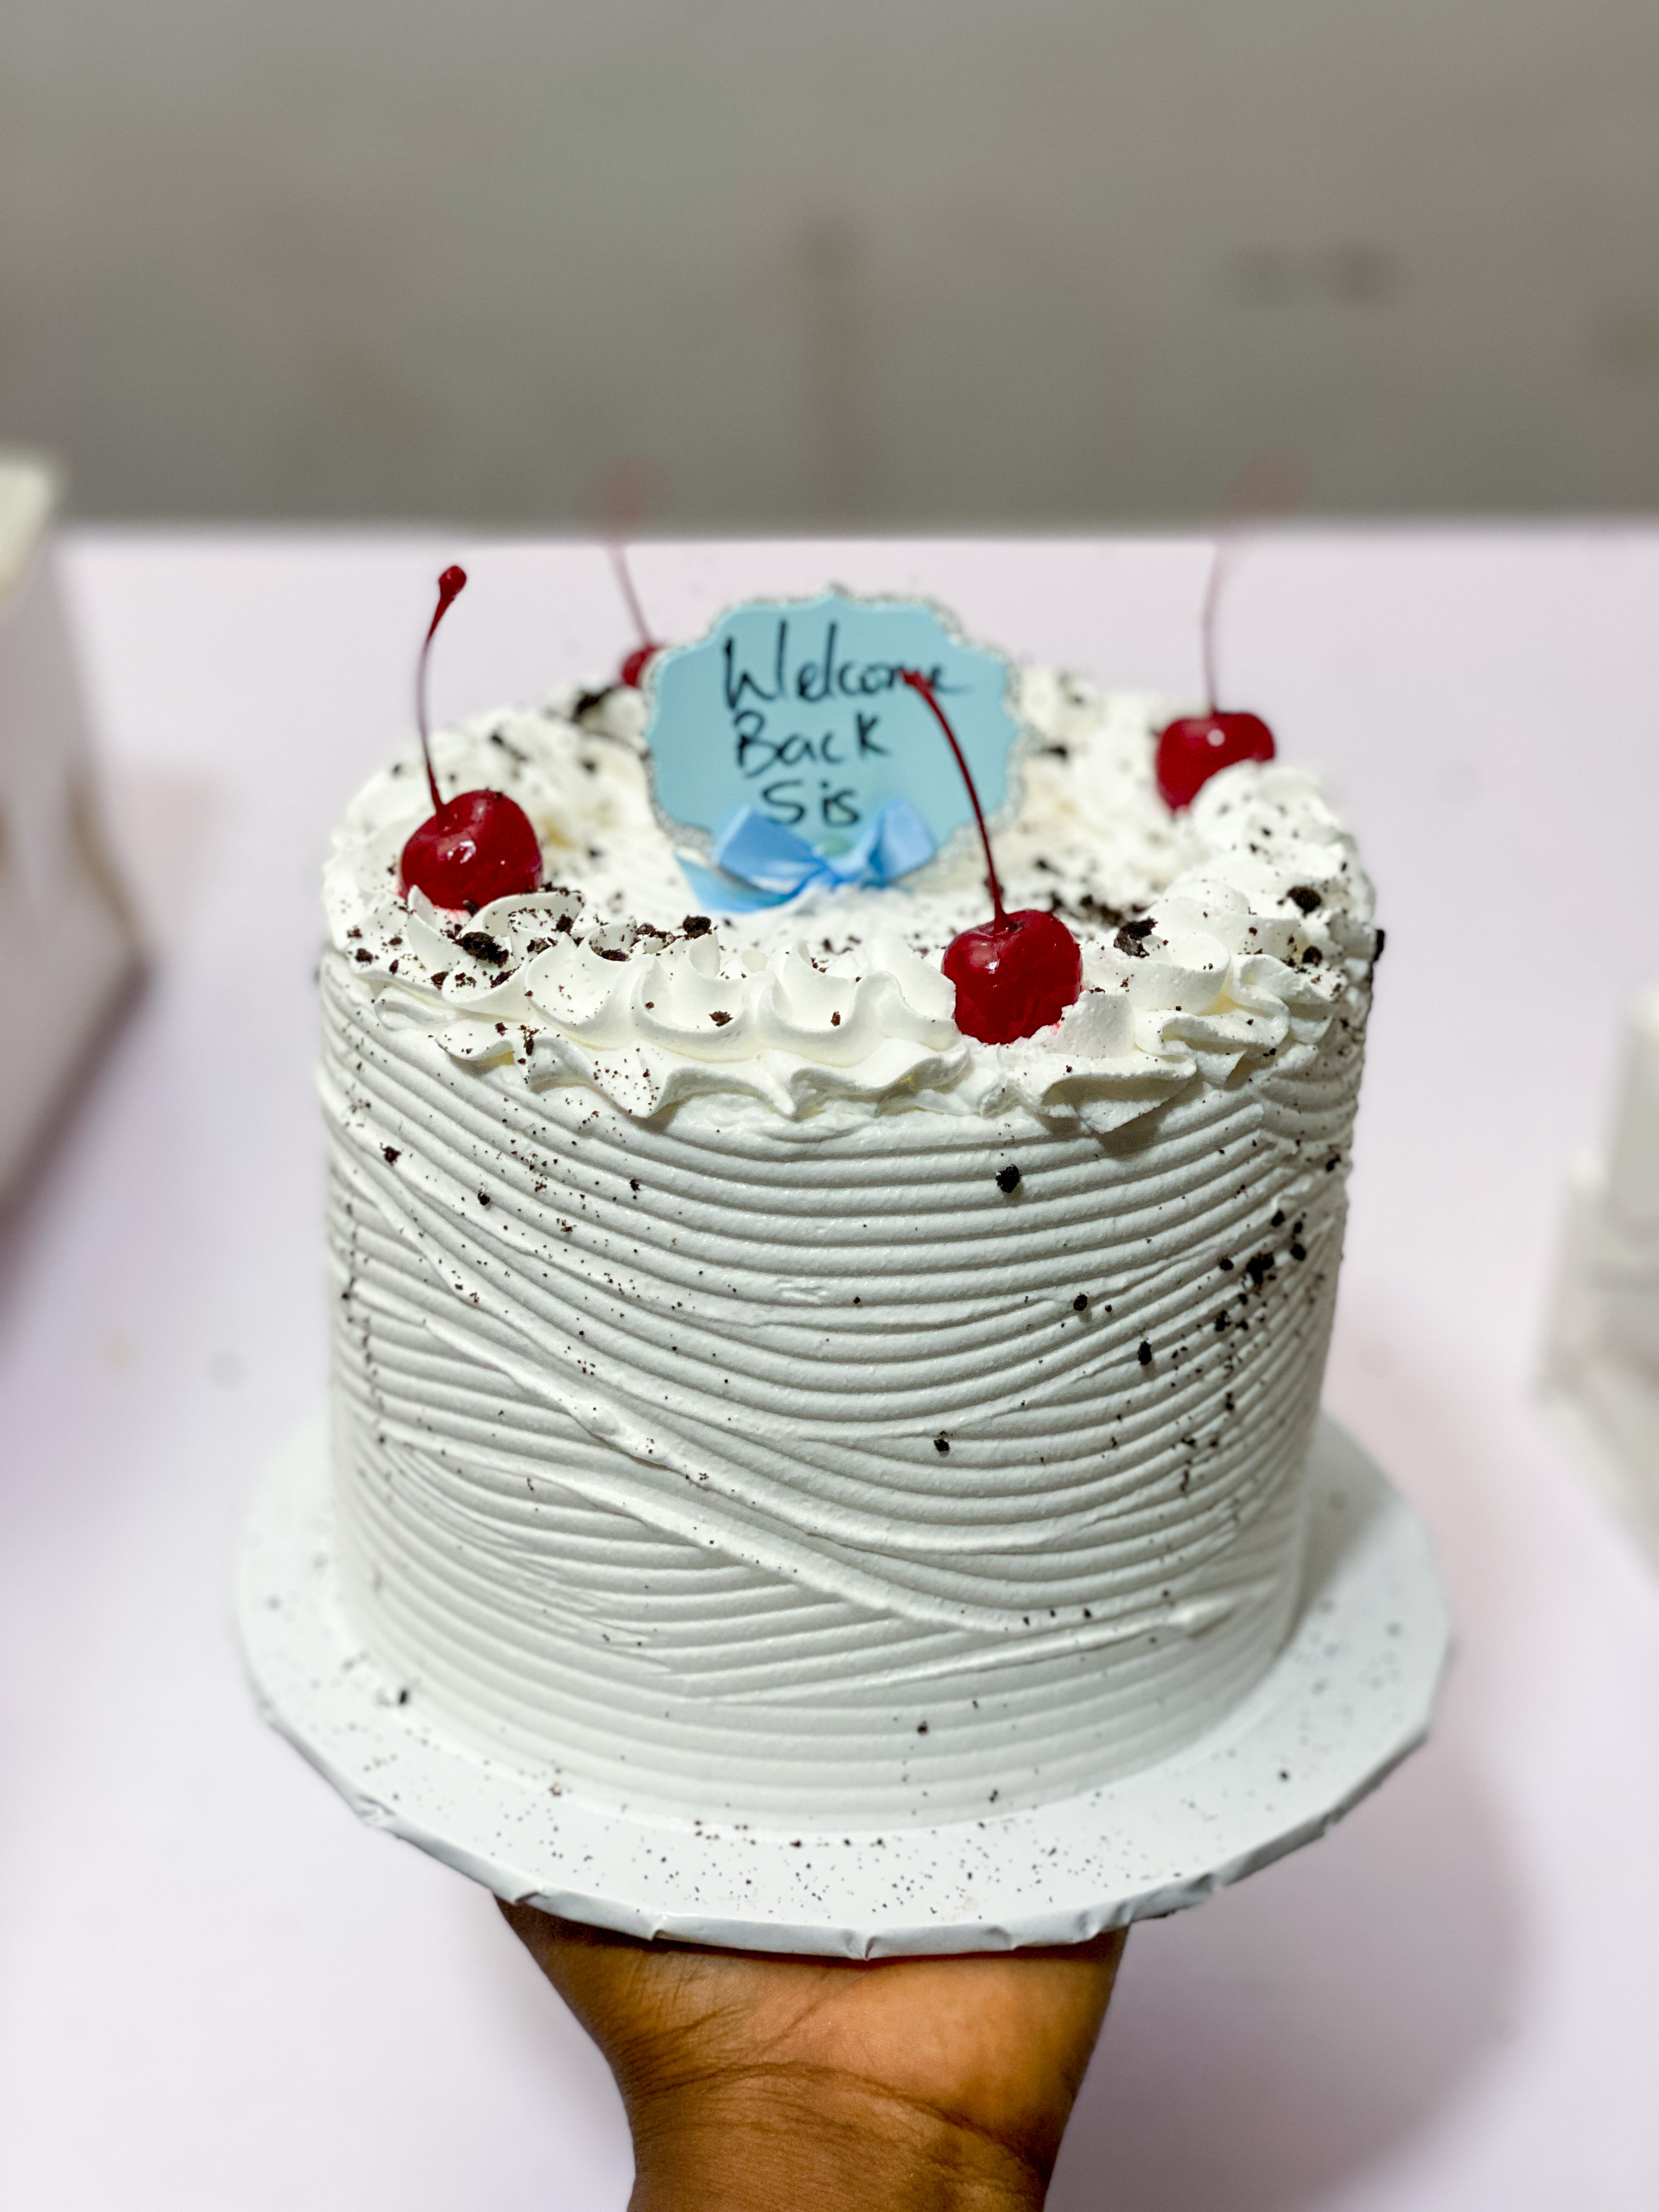 6 inch Whipped Cream Cake - Available in Vanilla, Red Velvet, Chocolate